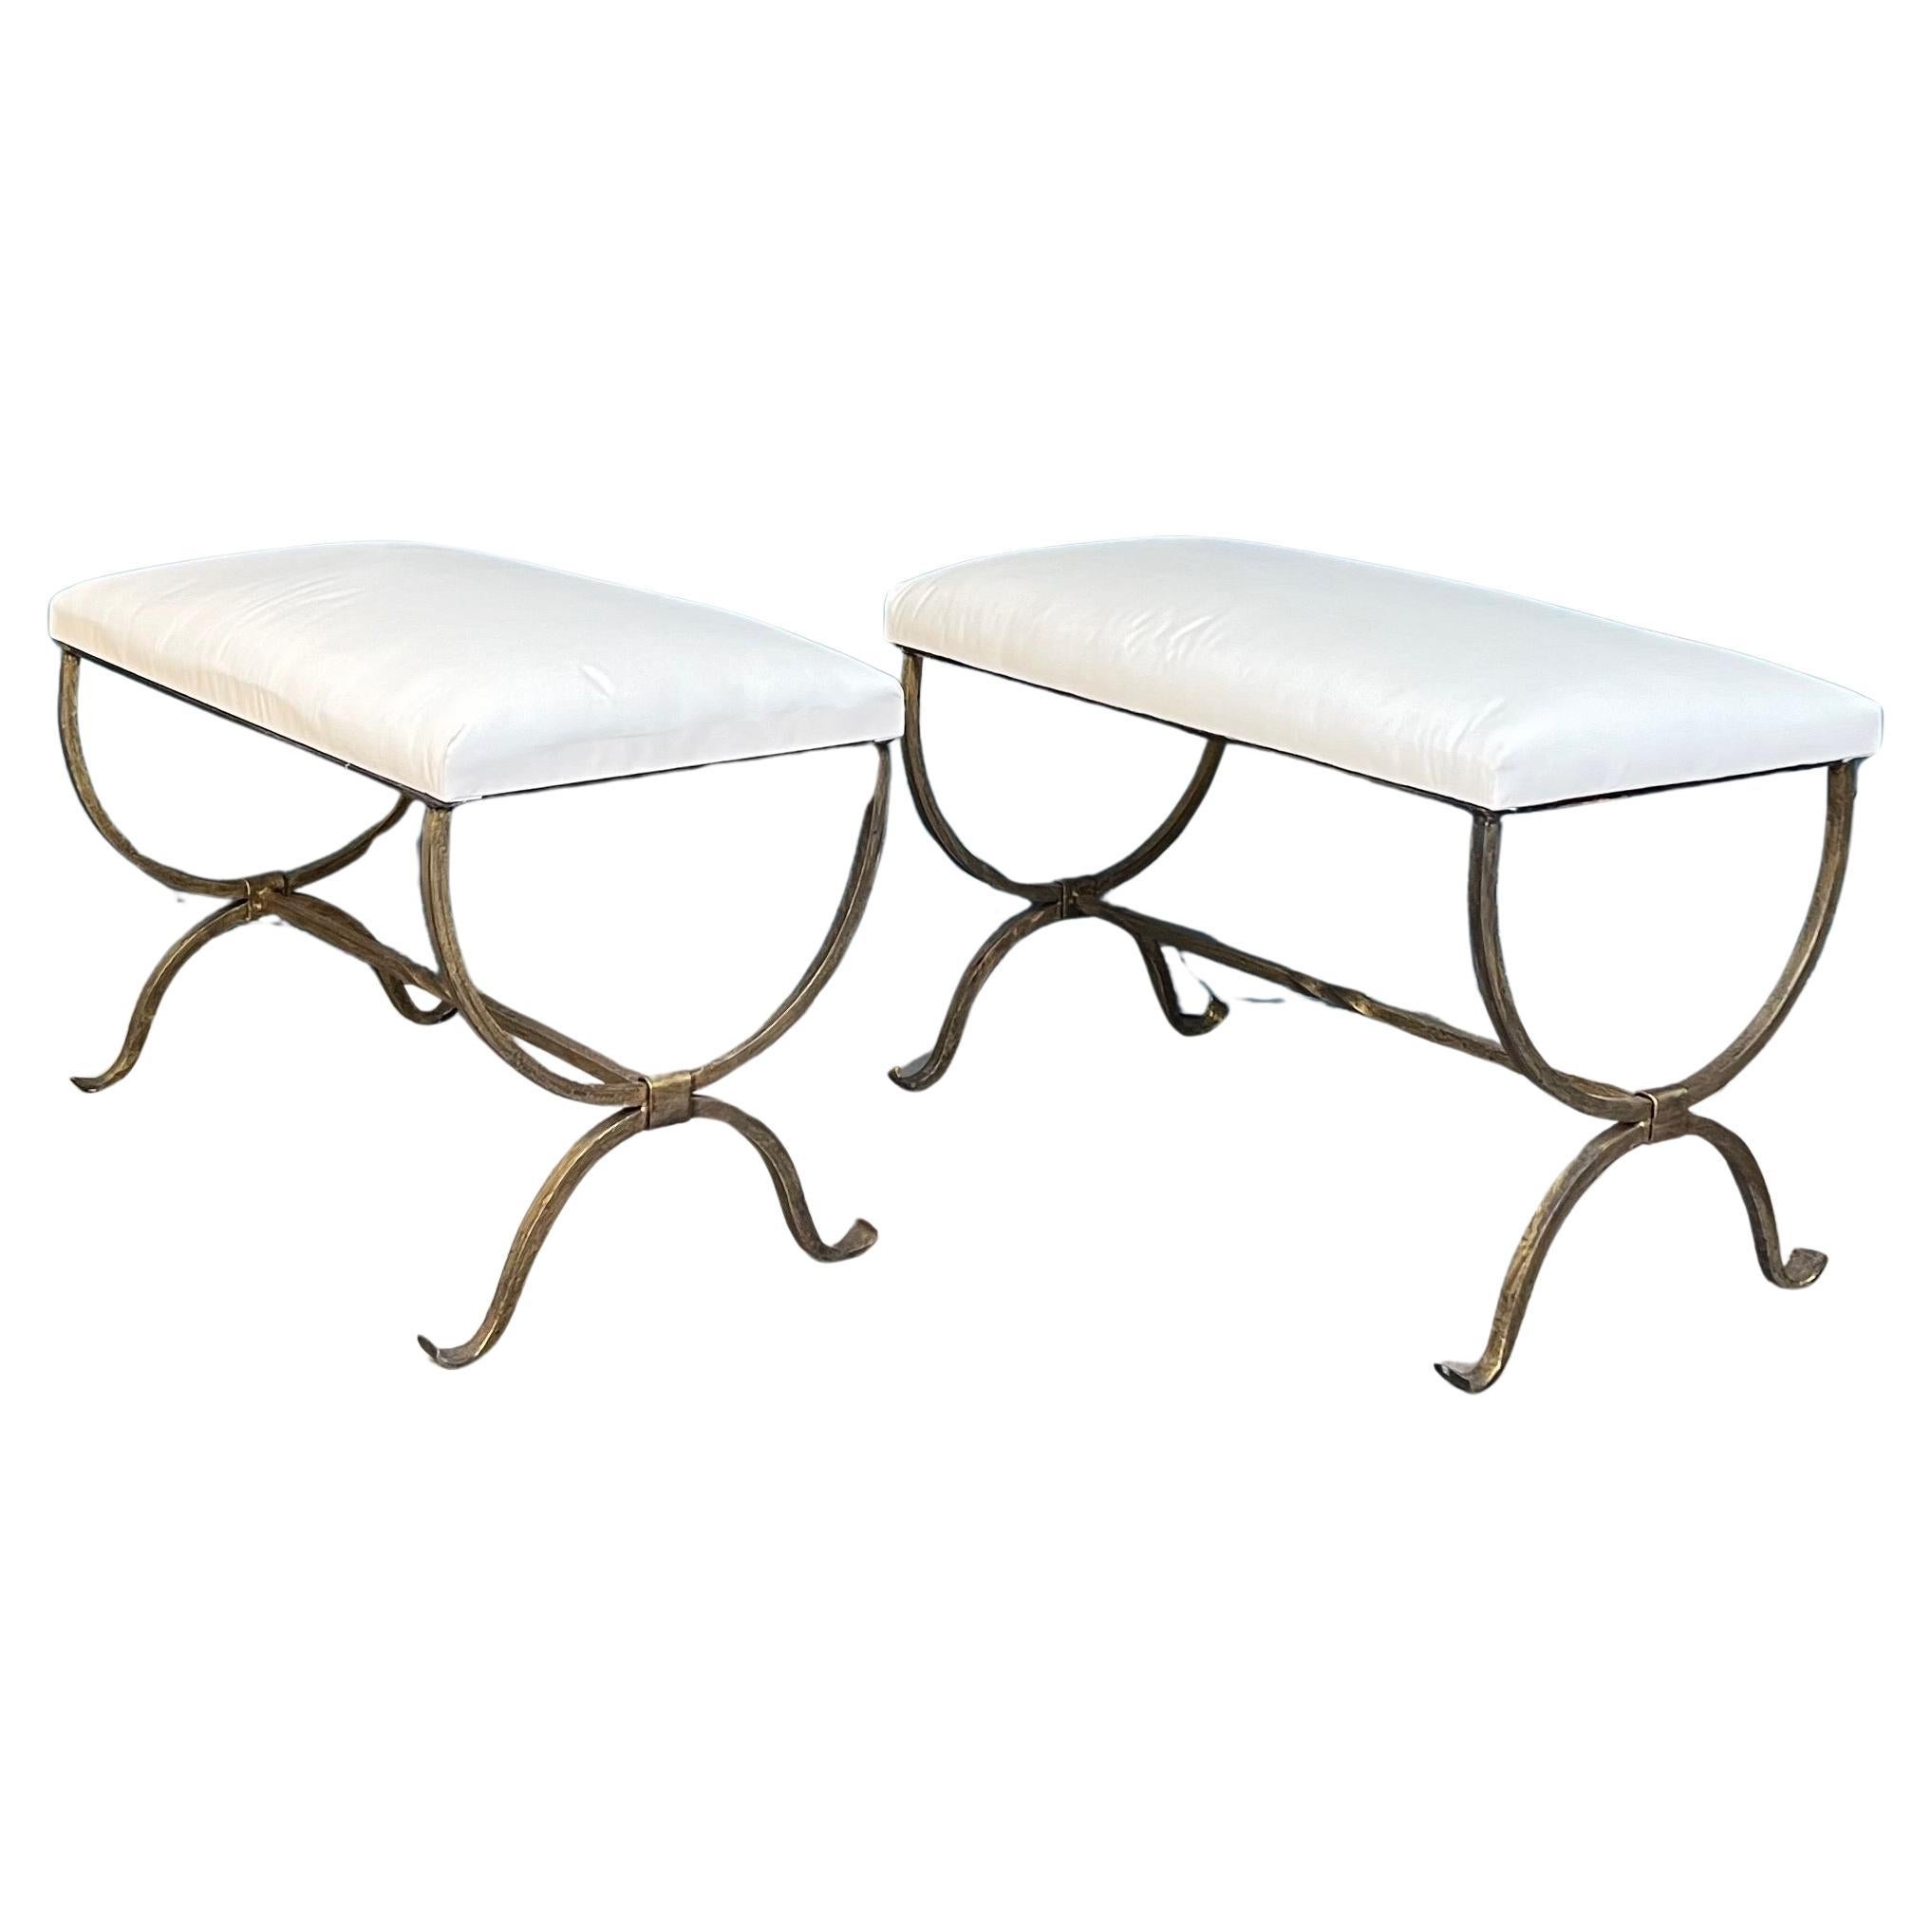 Pair of Forged and Gilt Iron Benches with Muslin Fabric